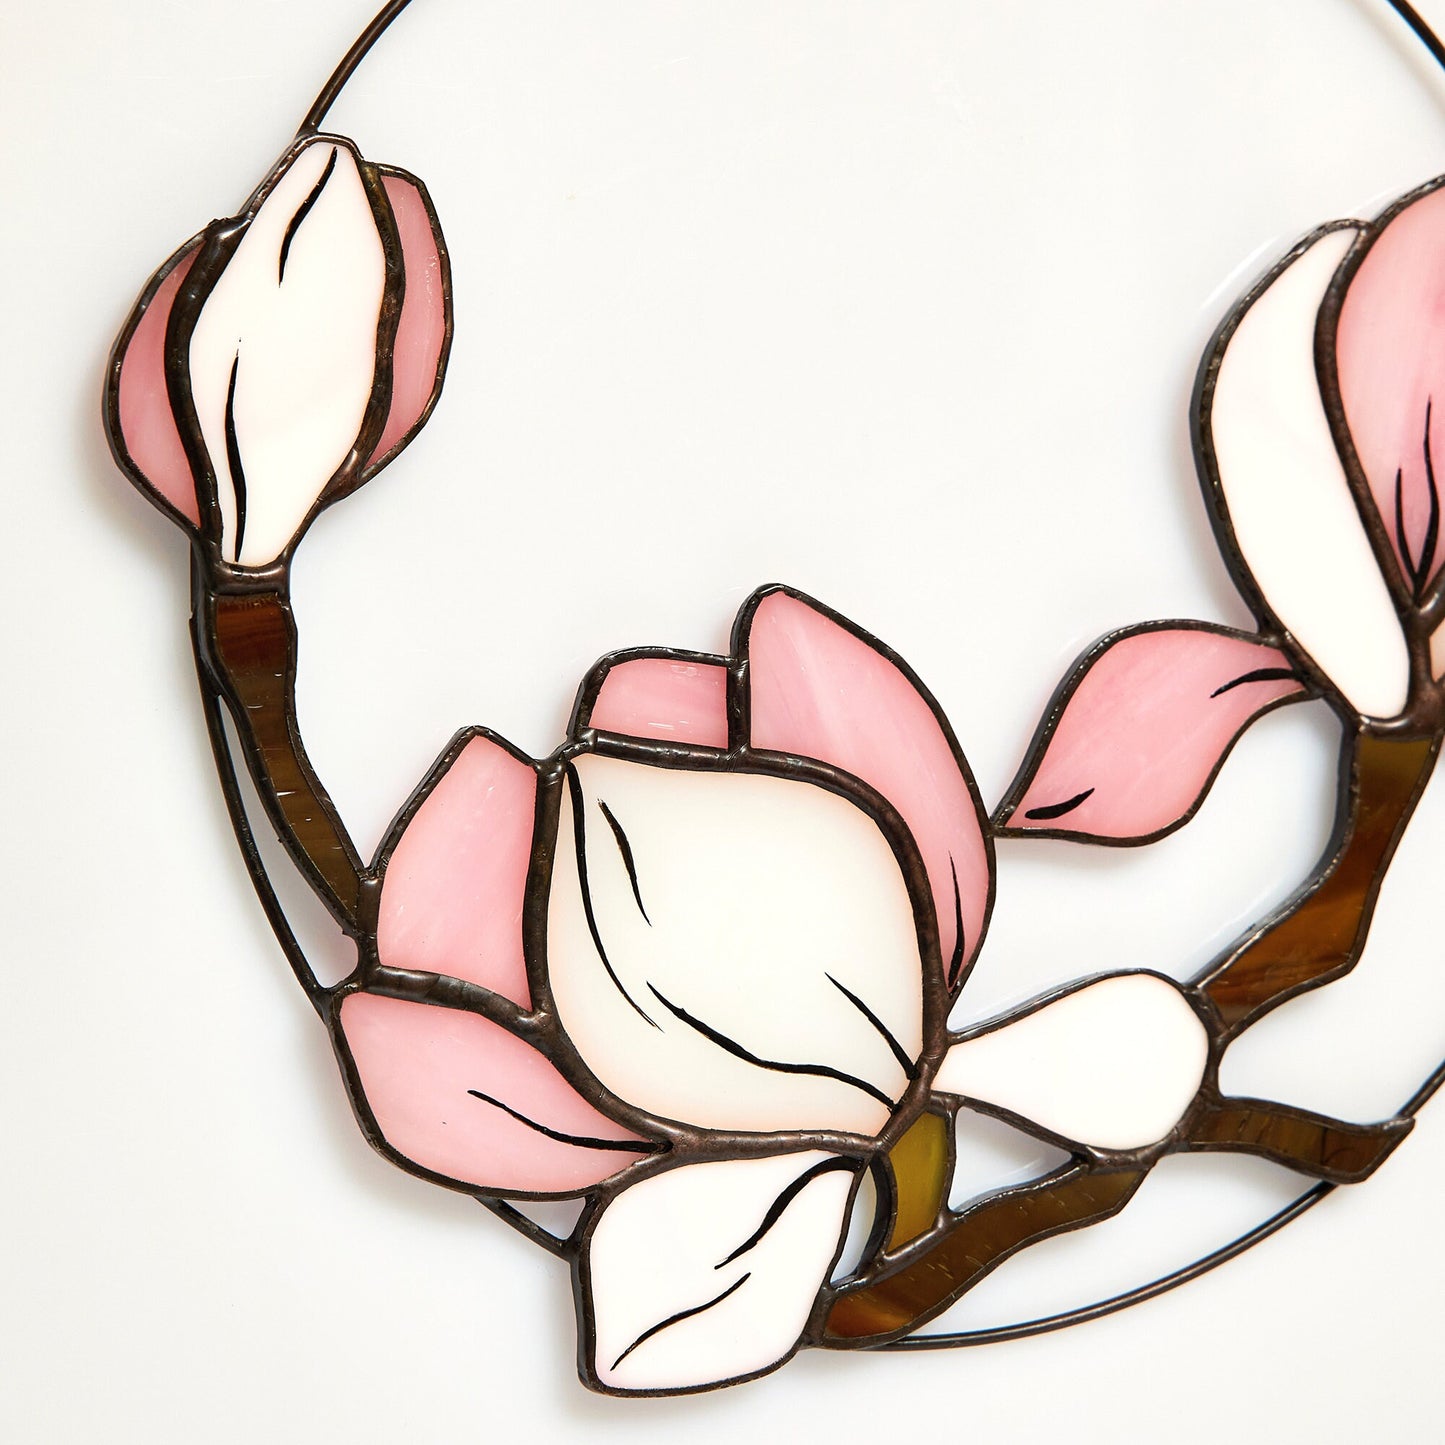 Magnolia Flower Stained Glass